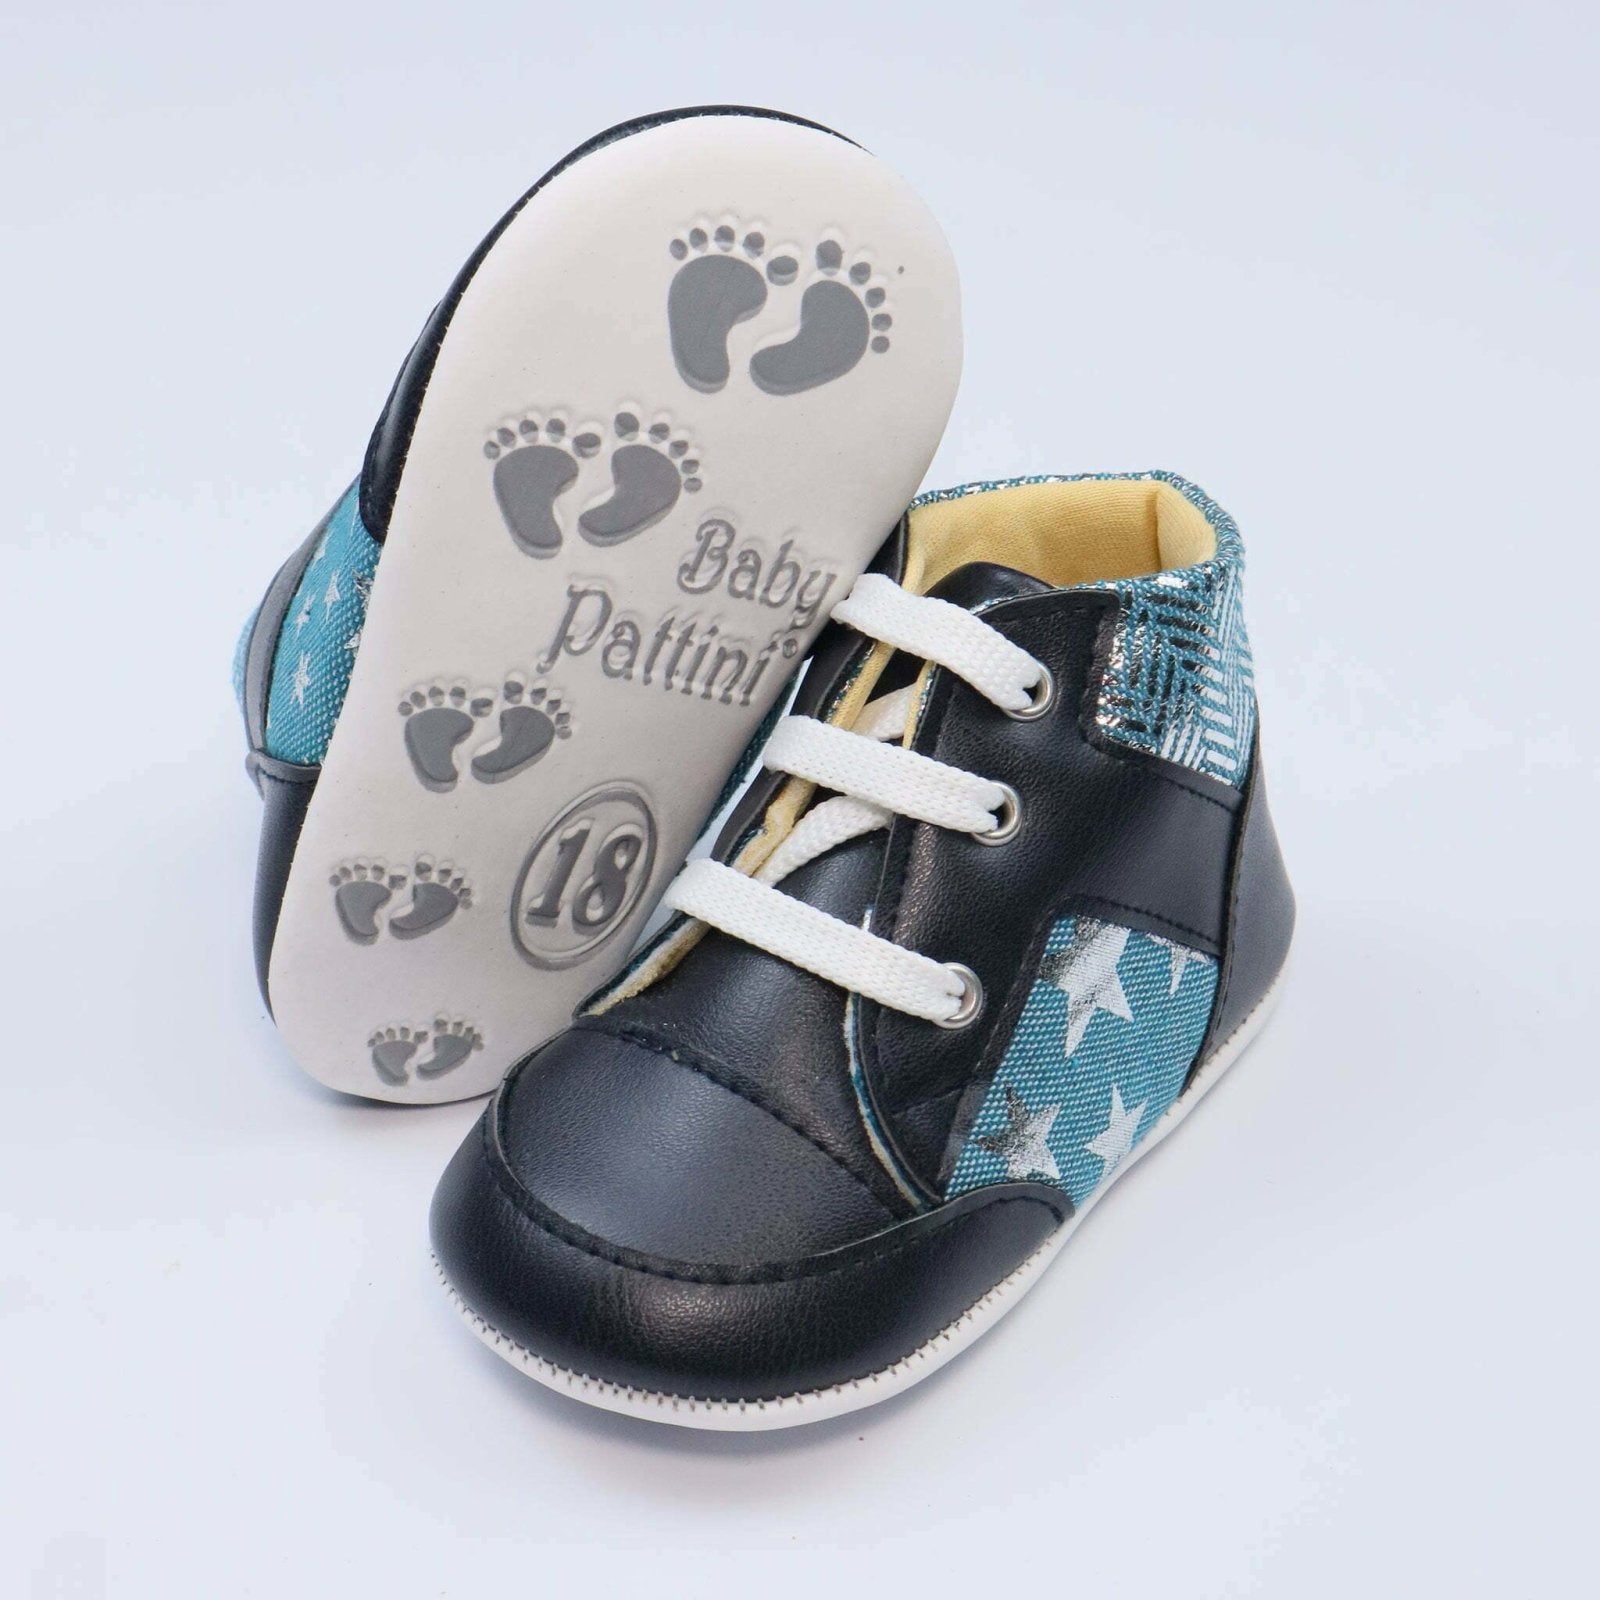 Baby Shoes Black Color With Stars | Baby Pattini - Zubaidas Mothershop